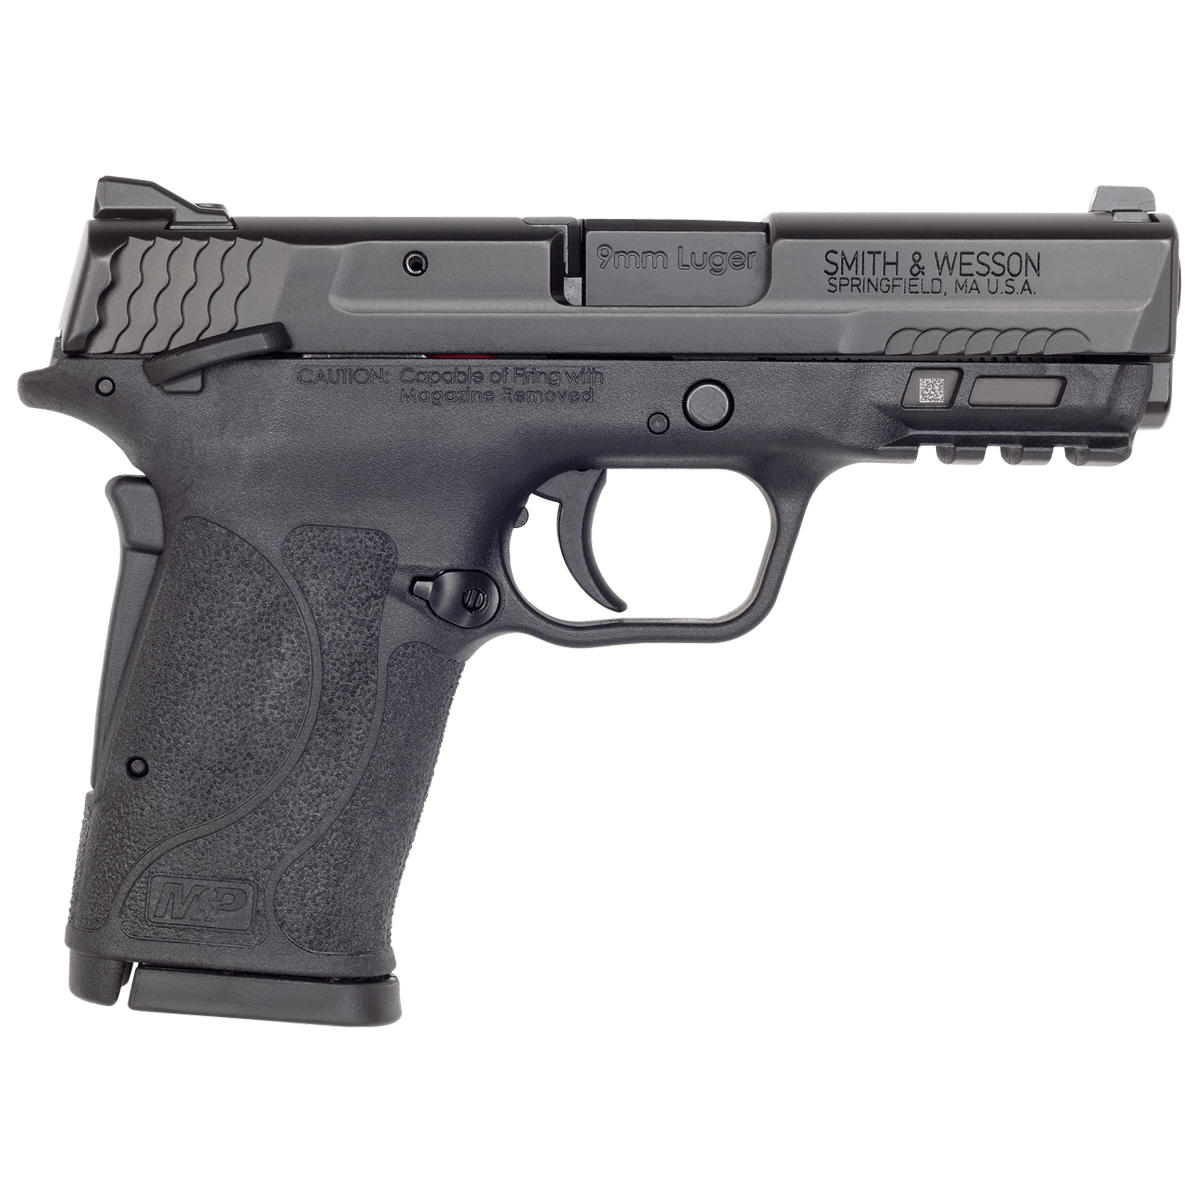 Smith & Wesson M&P9 M2.0 Shield EZ 9mm Pistol with Thumb Safety